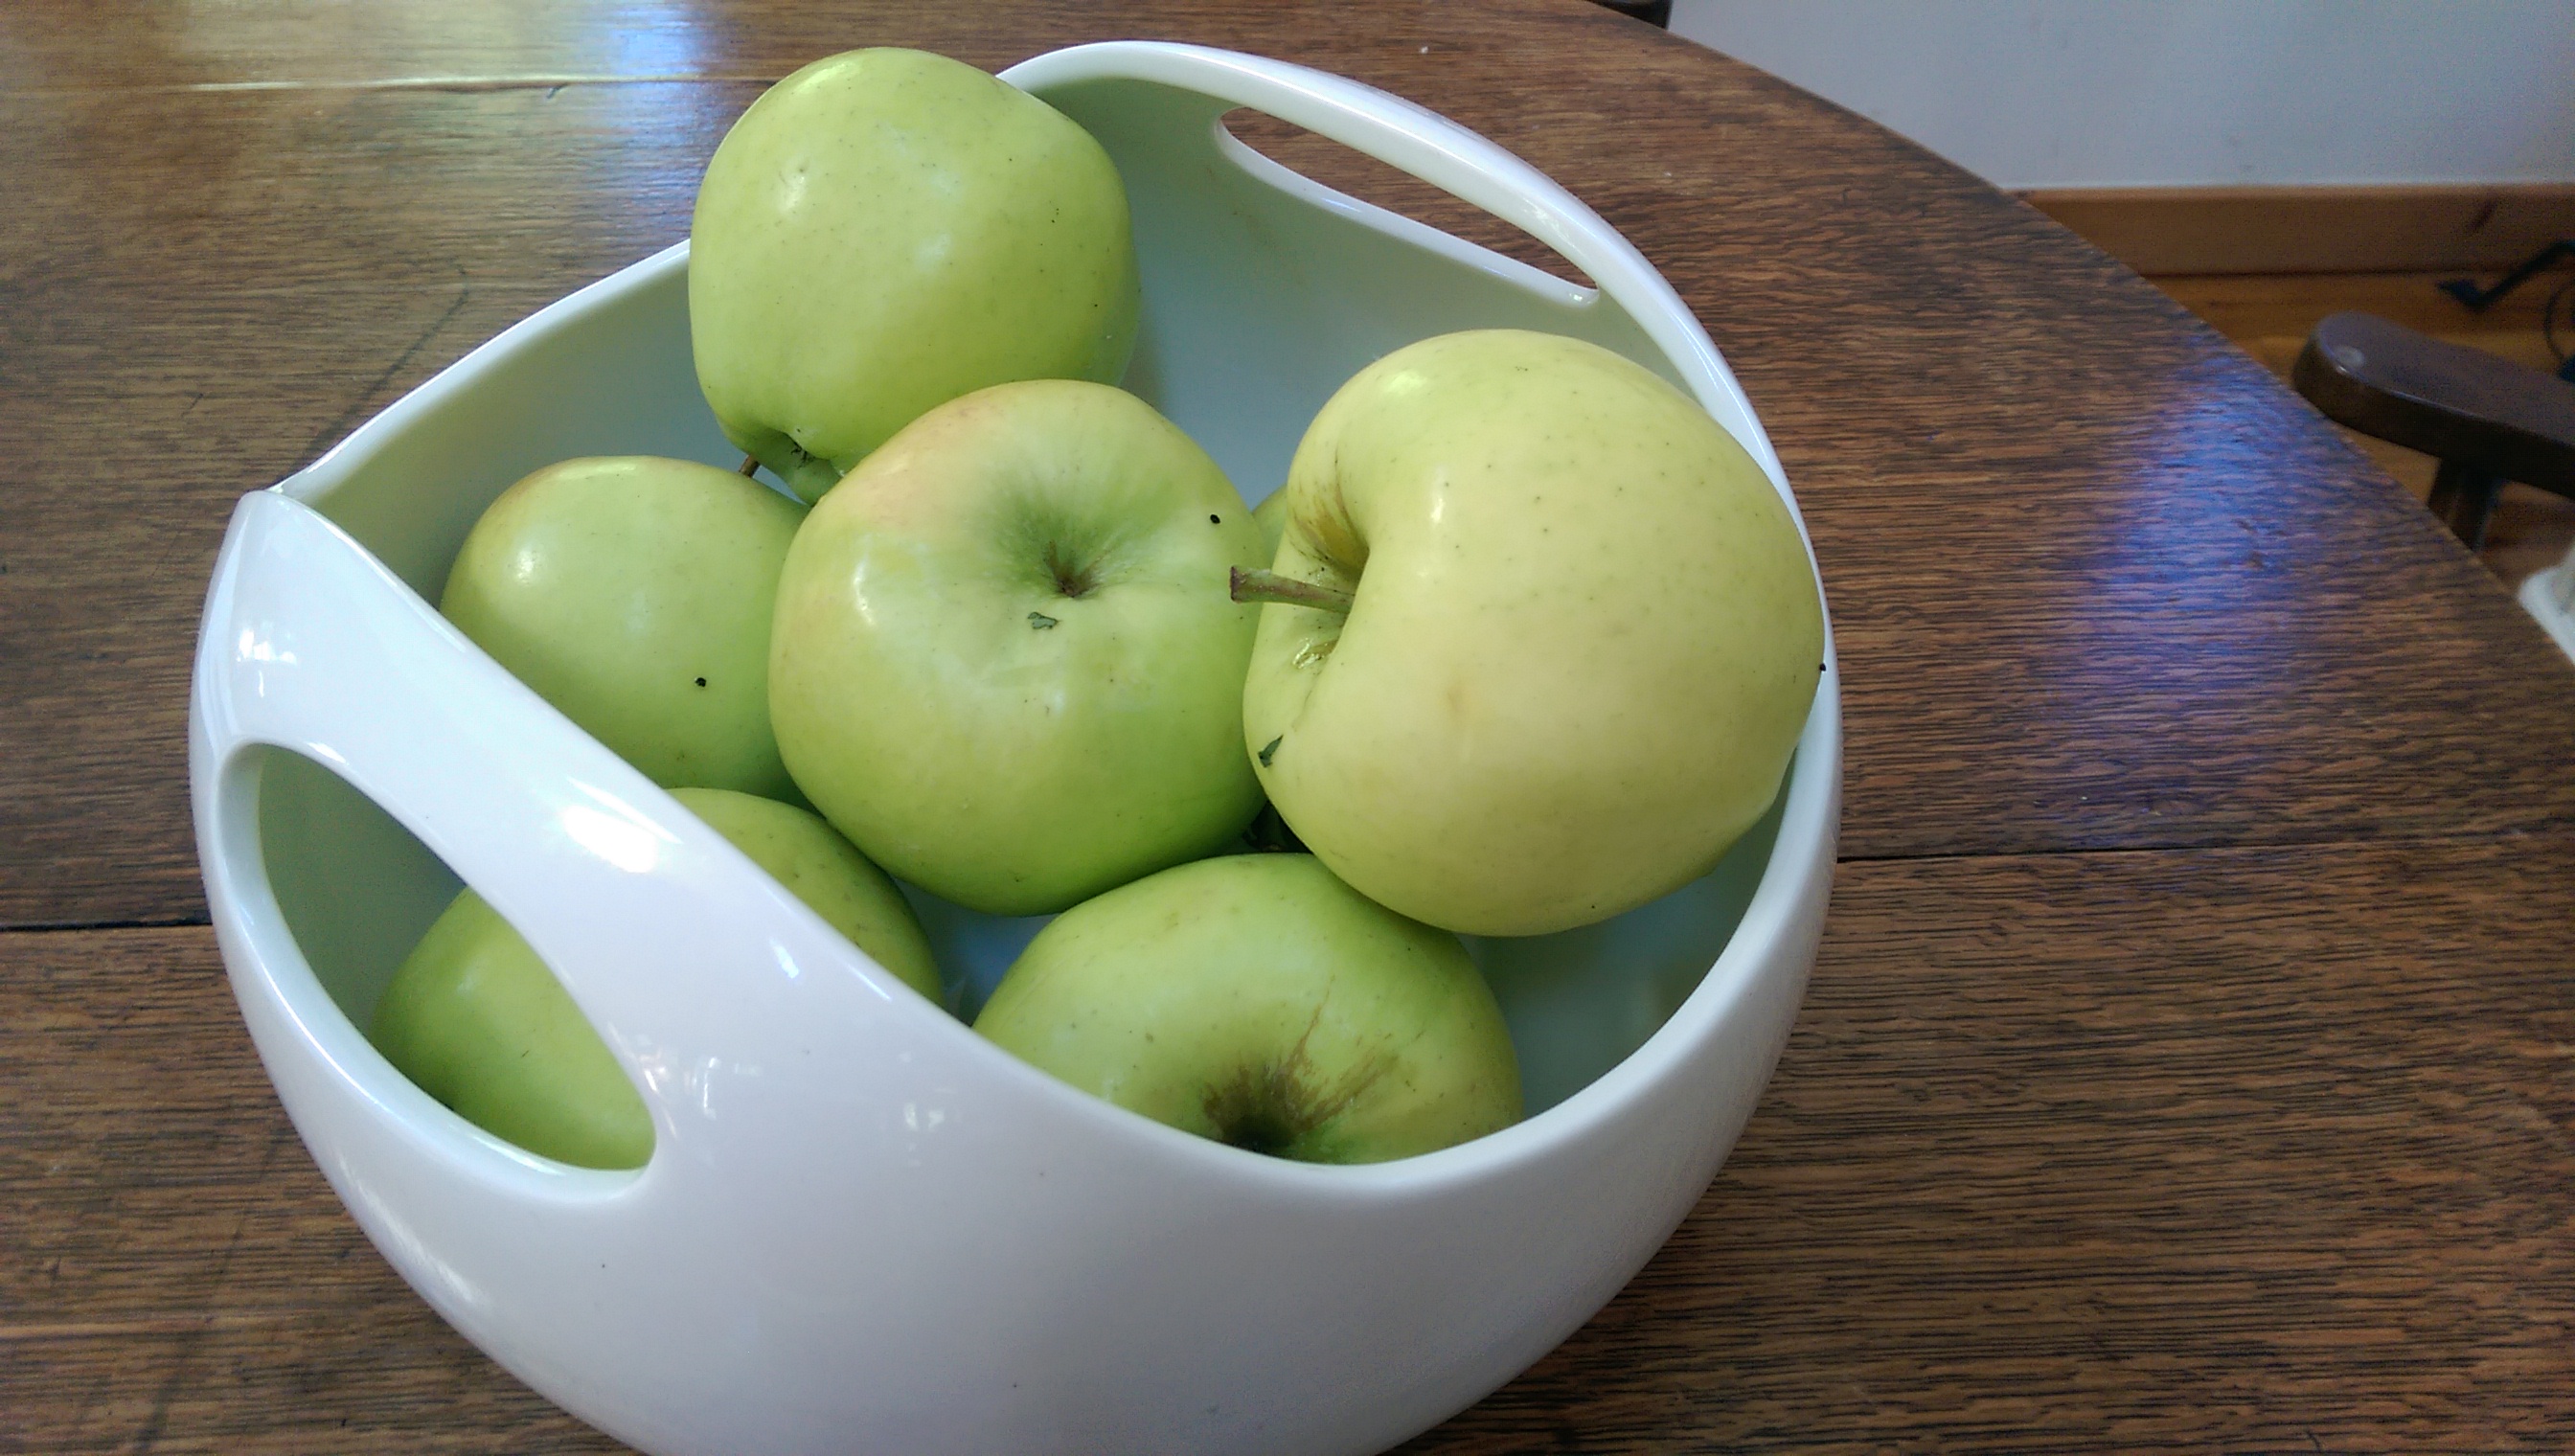 white bowl filled with green apples